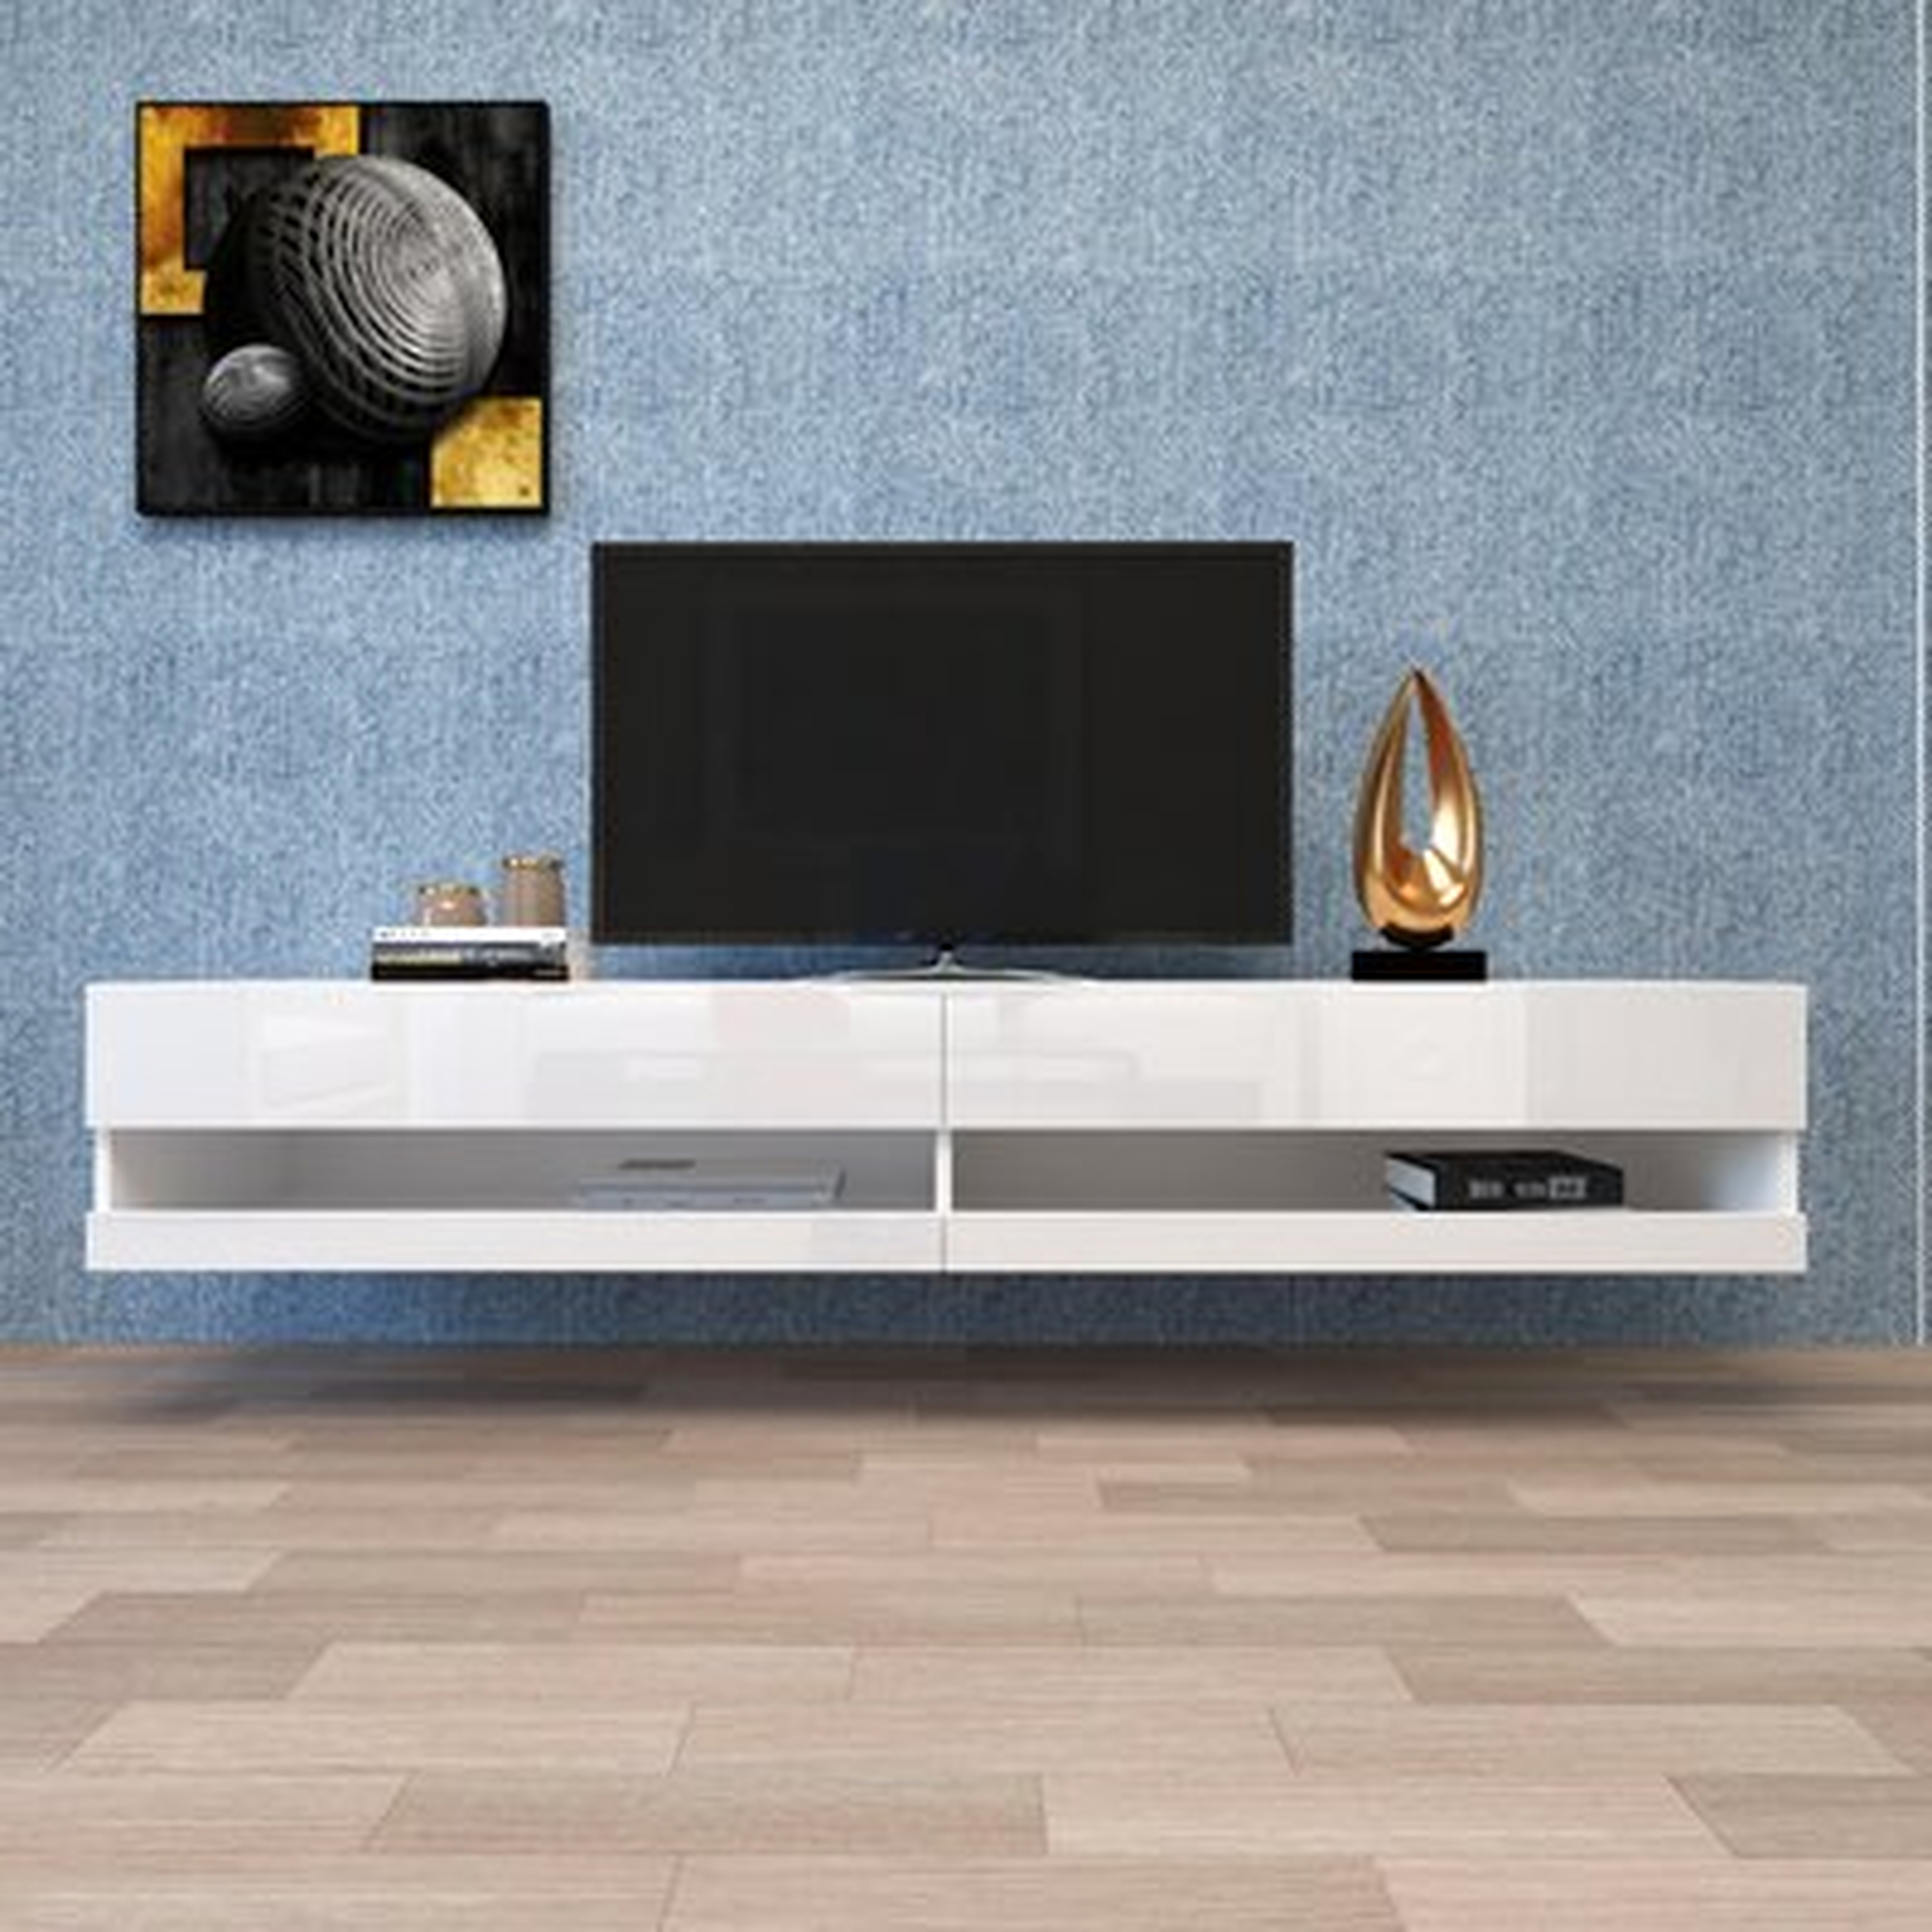 Wall Mounted Floating 80" TV Stand With 20 Color Leds, Modern TV Stand, Wood Media Storage Console - Wayfair